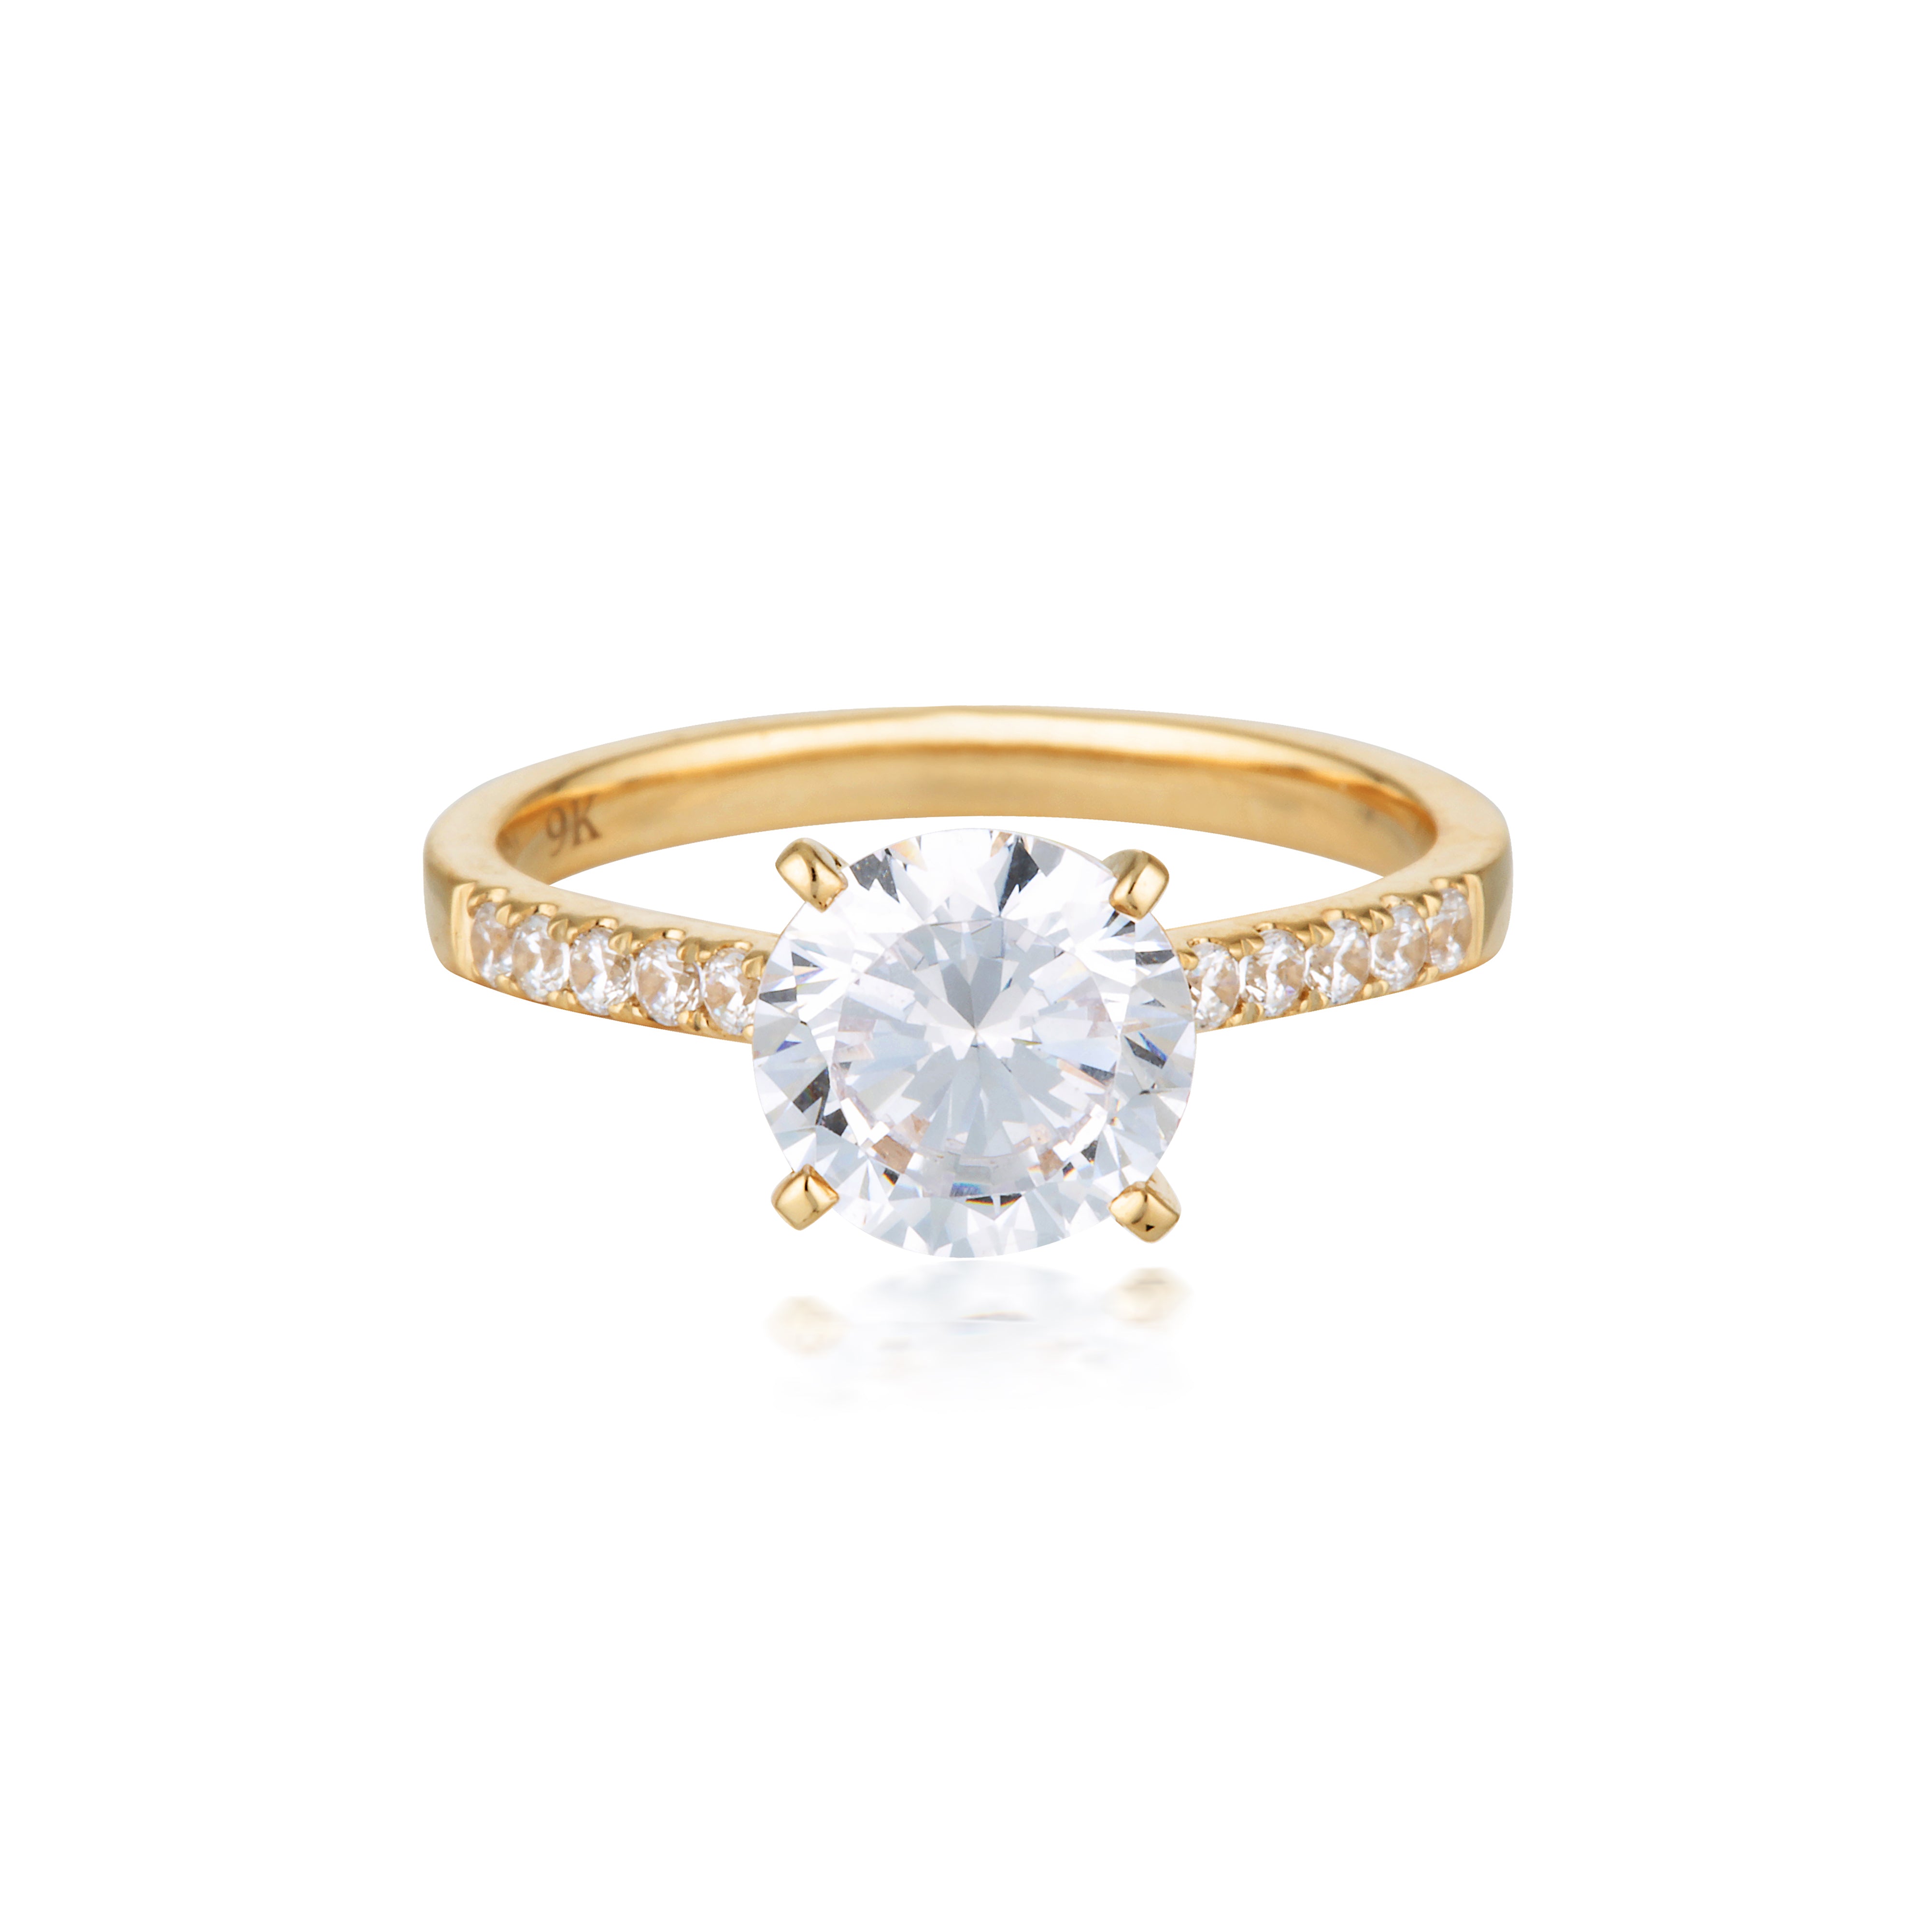 ROUND BRILLIANT CUT 2CT MOISSANITE ENGAGEMENT RING IN 9CT YELLOW GOLD